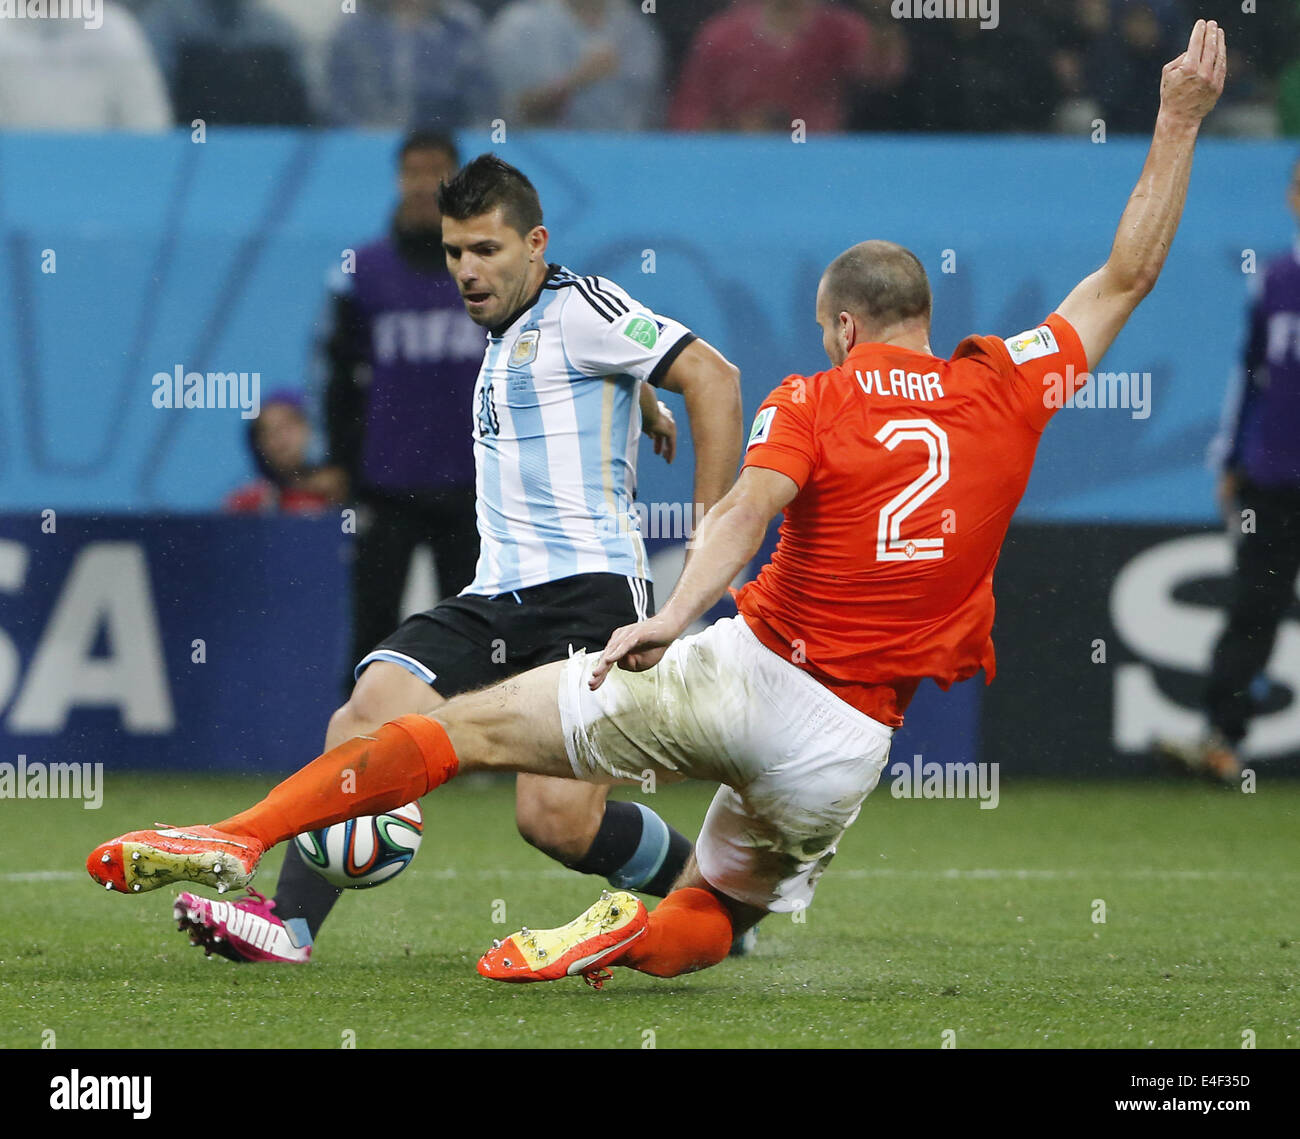 Sao Paulo, Brazil. 9th July, 2014. Netherlands' Ron Vlaar (R) vies with Argentina's Sergio Aguero during a semifinal match between Netherlands and Argentina of 2014 FIFA World Cup at the Arena de Sao Paulo Stadium in Sao Paulo, Brazil, on July 9, 2014. Credit:  Zhou Lei/Xinhua/Alamy Live News Stock Photo